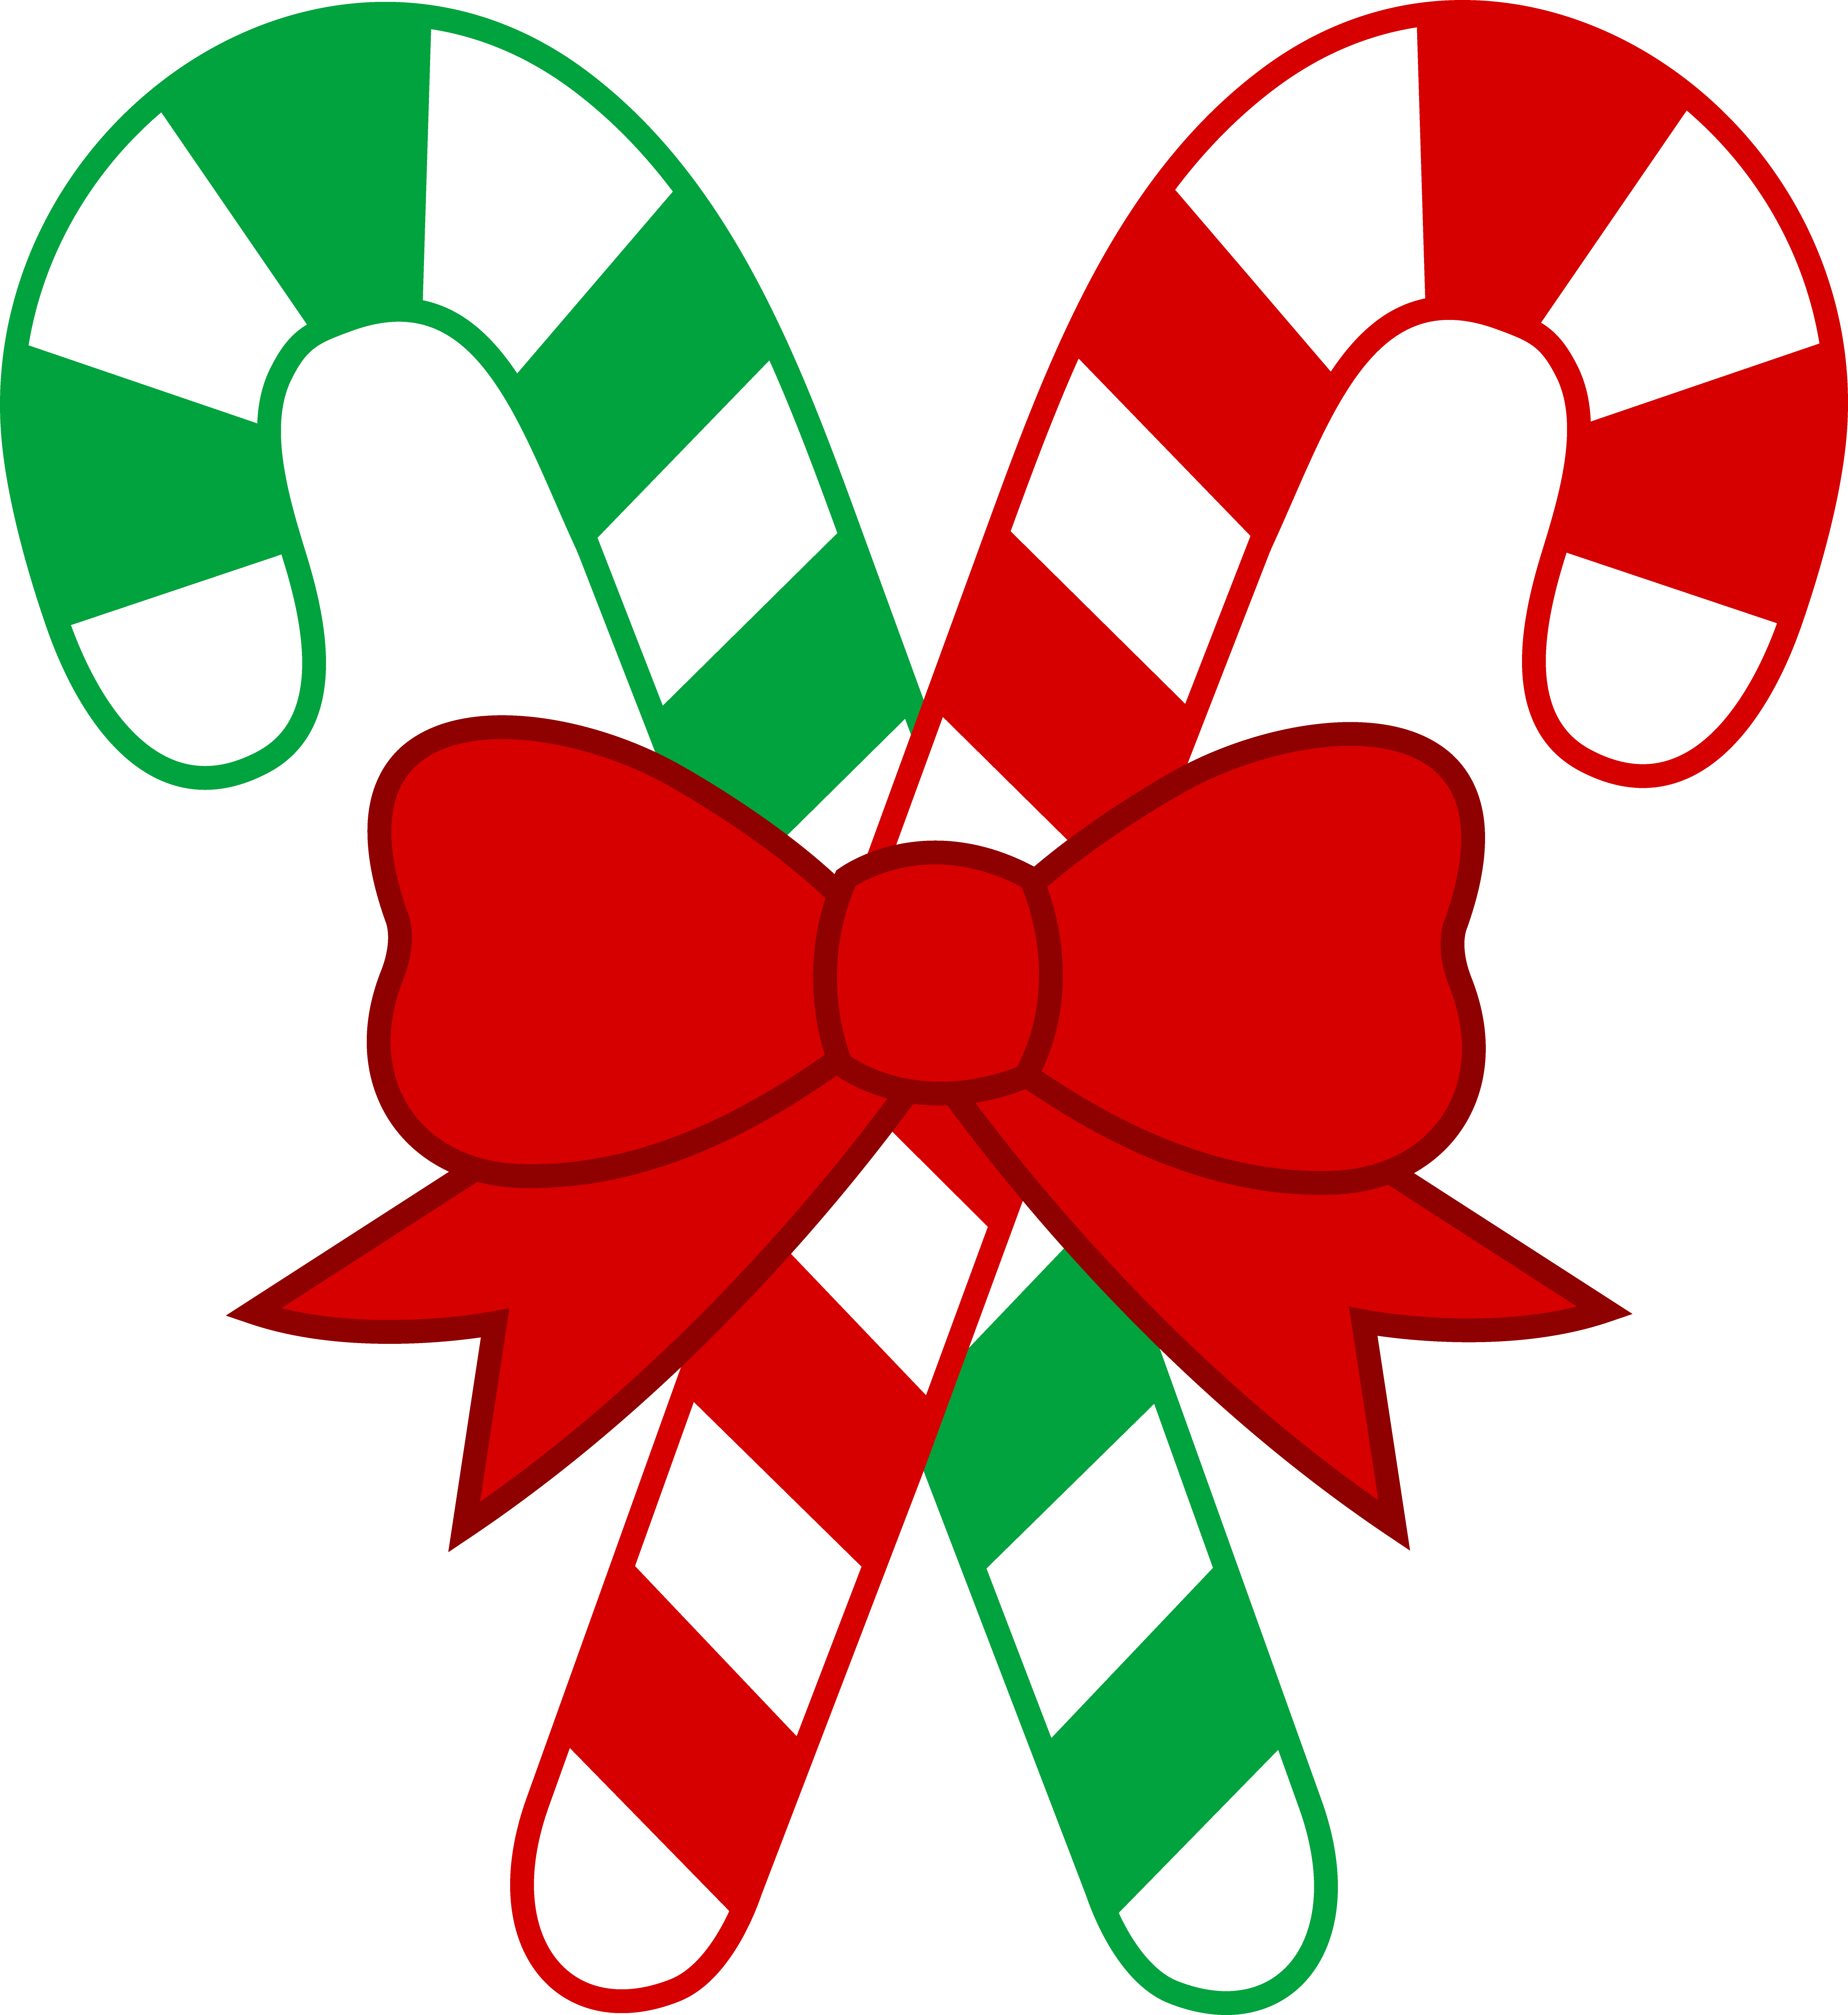 Clipart Christmas Party | Clipart Panda - Free Clipart Images